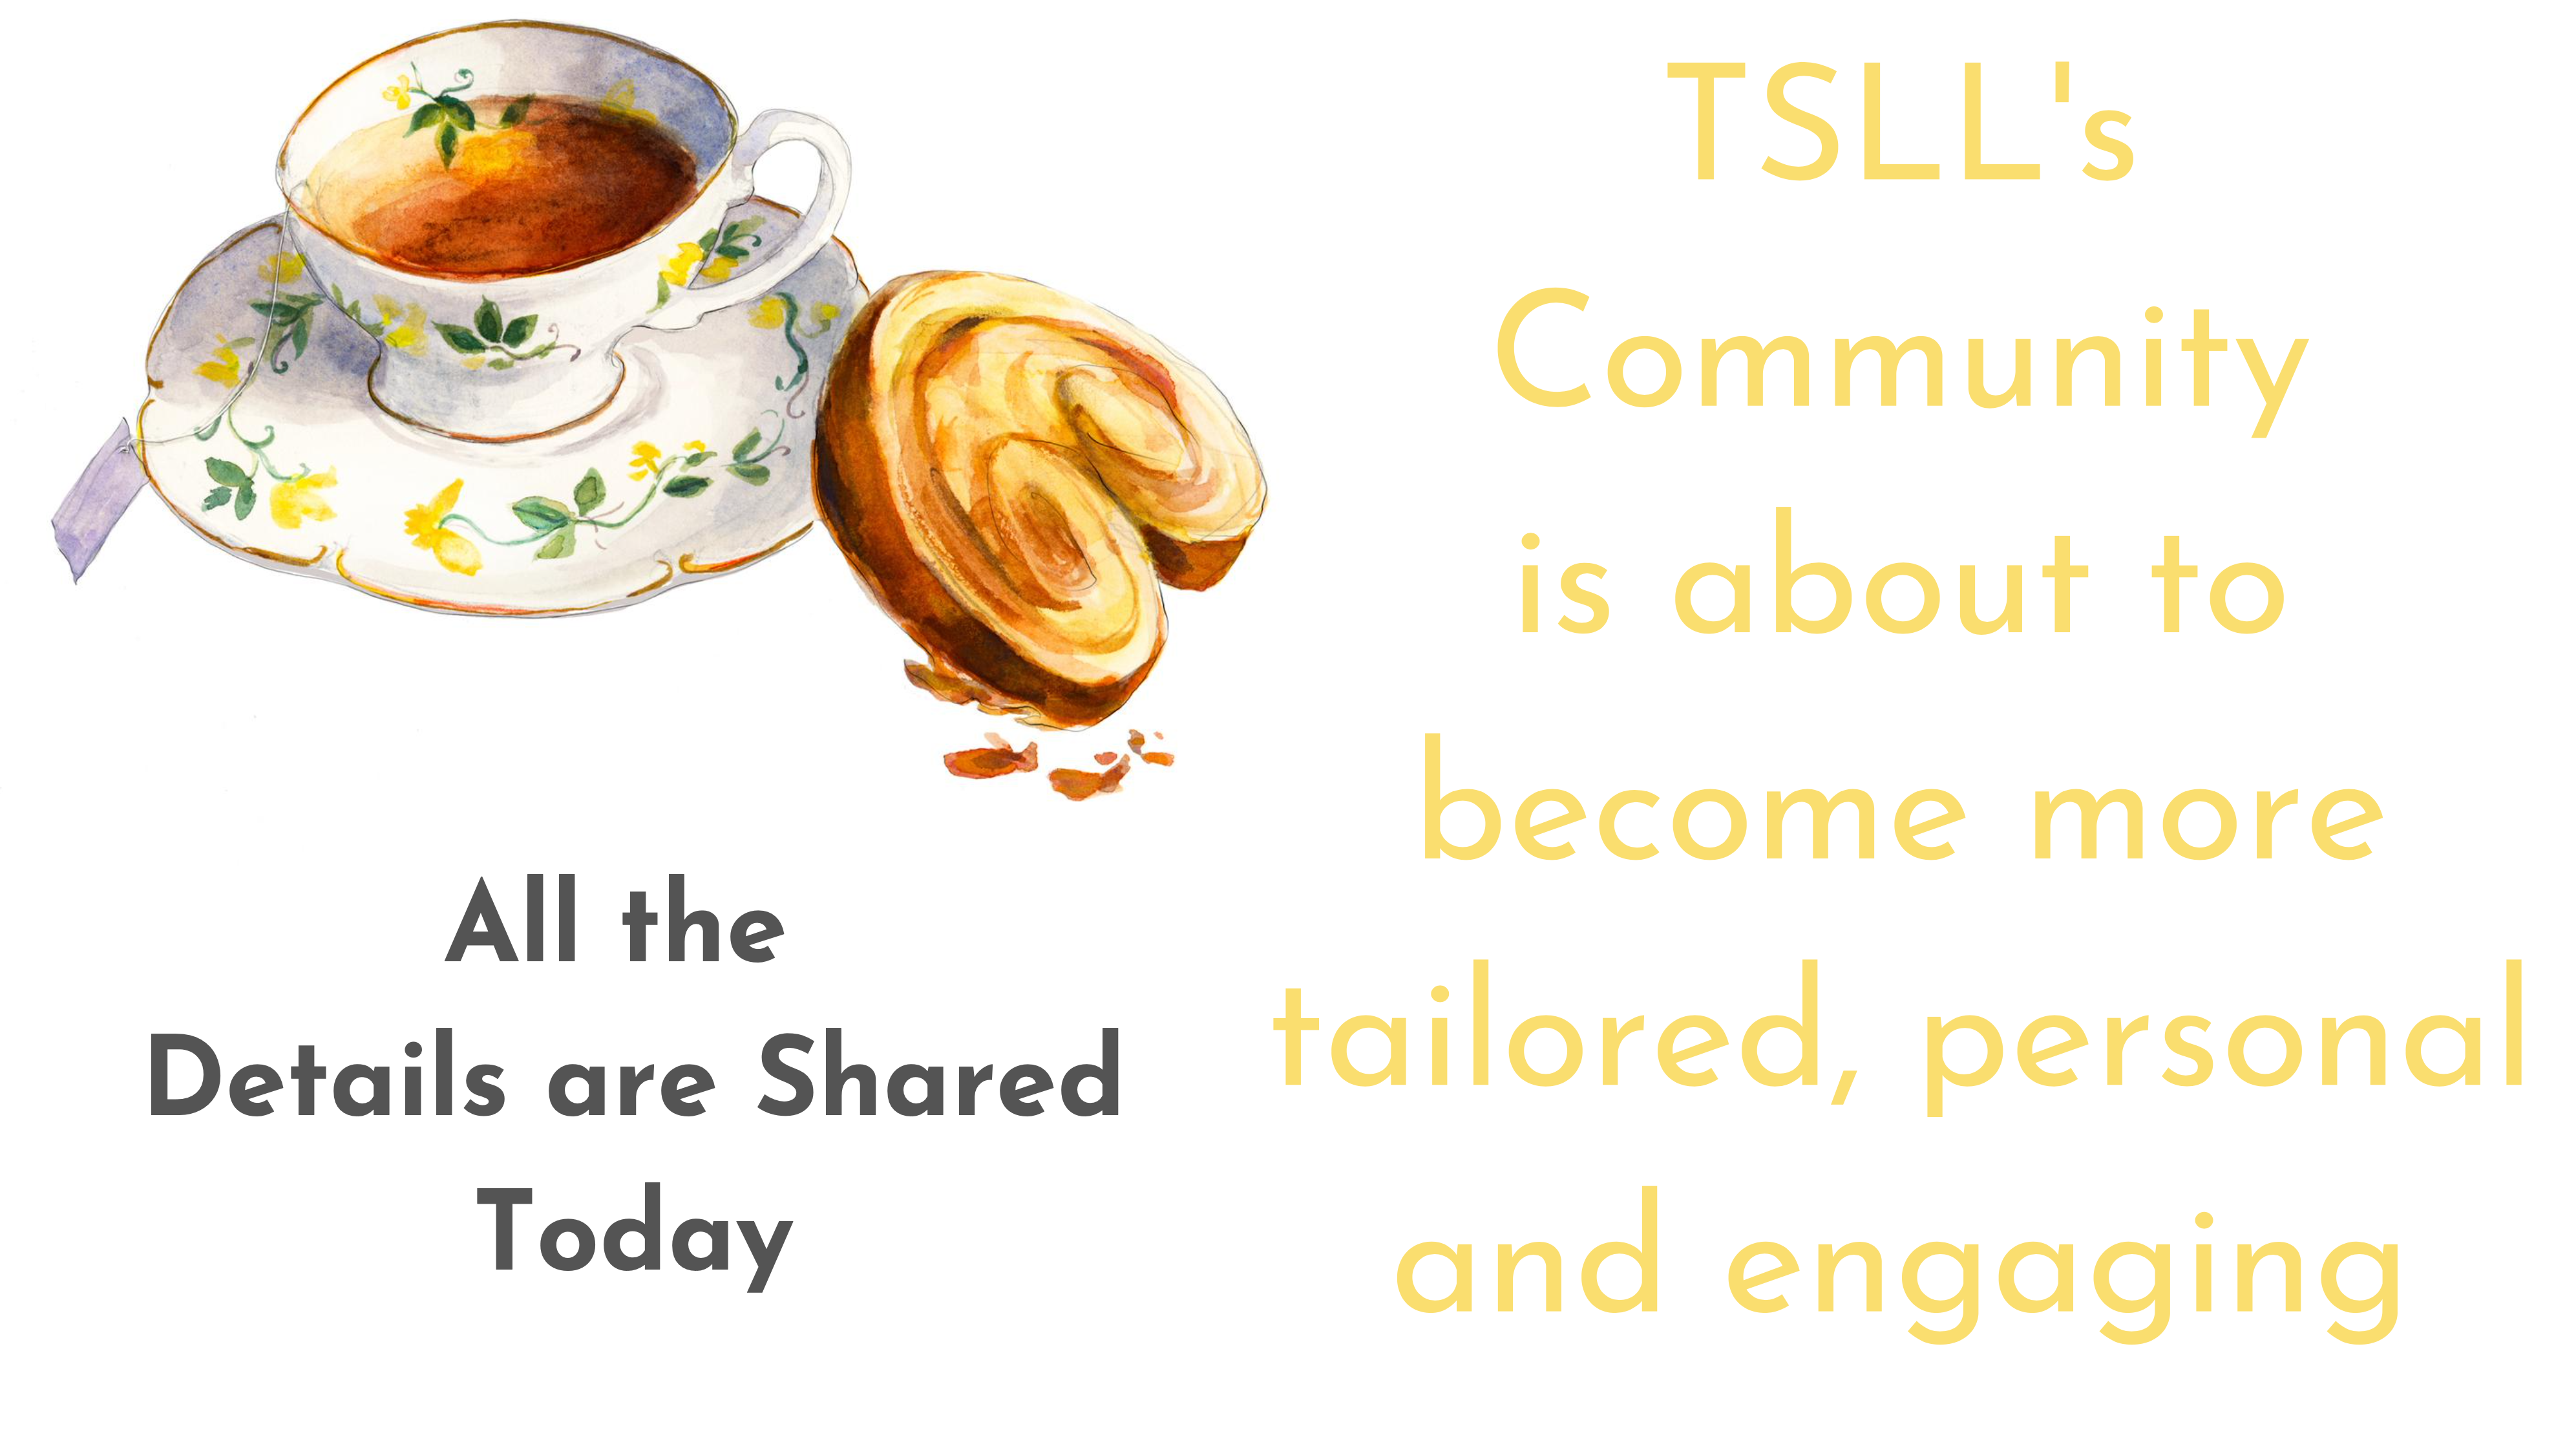 All the Details on TSLL’s Upcoming Changes + A Limited Introductory Opportunity to Save Money